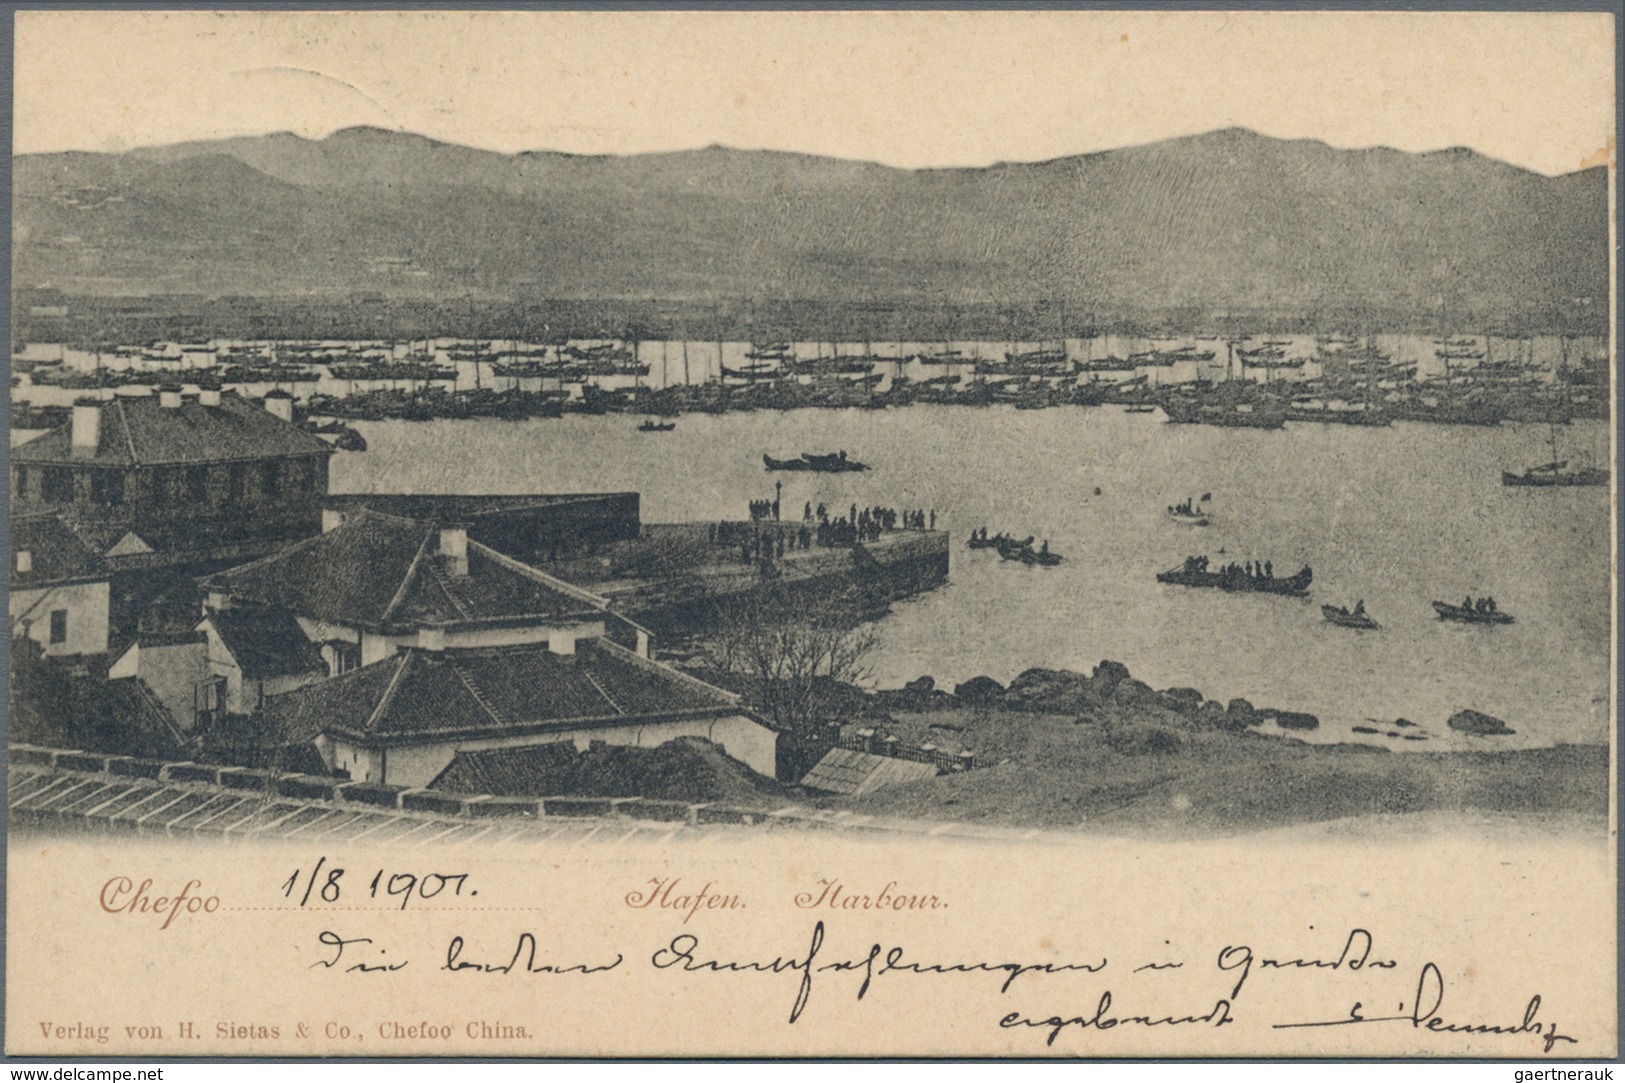 China - Fremde Postanstalten / Foreign Offices: Austro-Hungarian Navy units in Boxer upheaval, 1901,